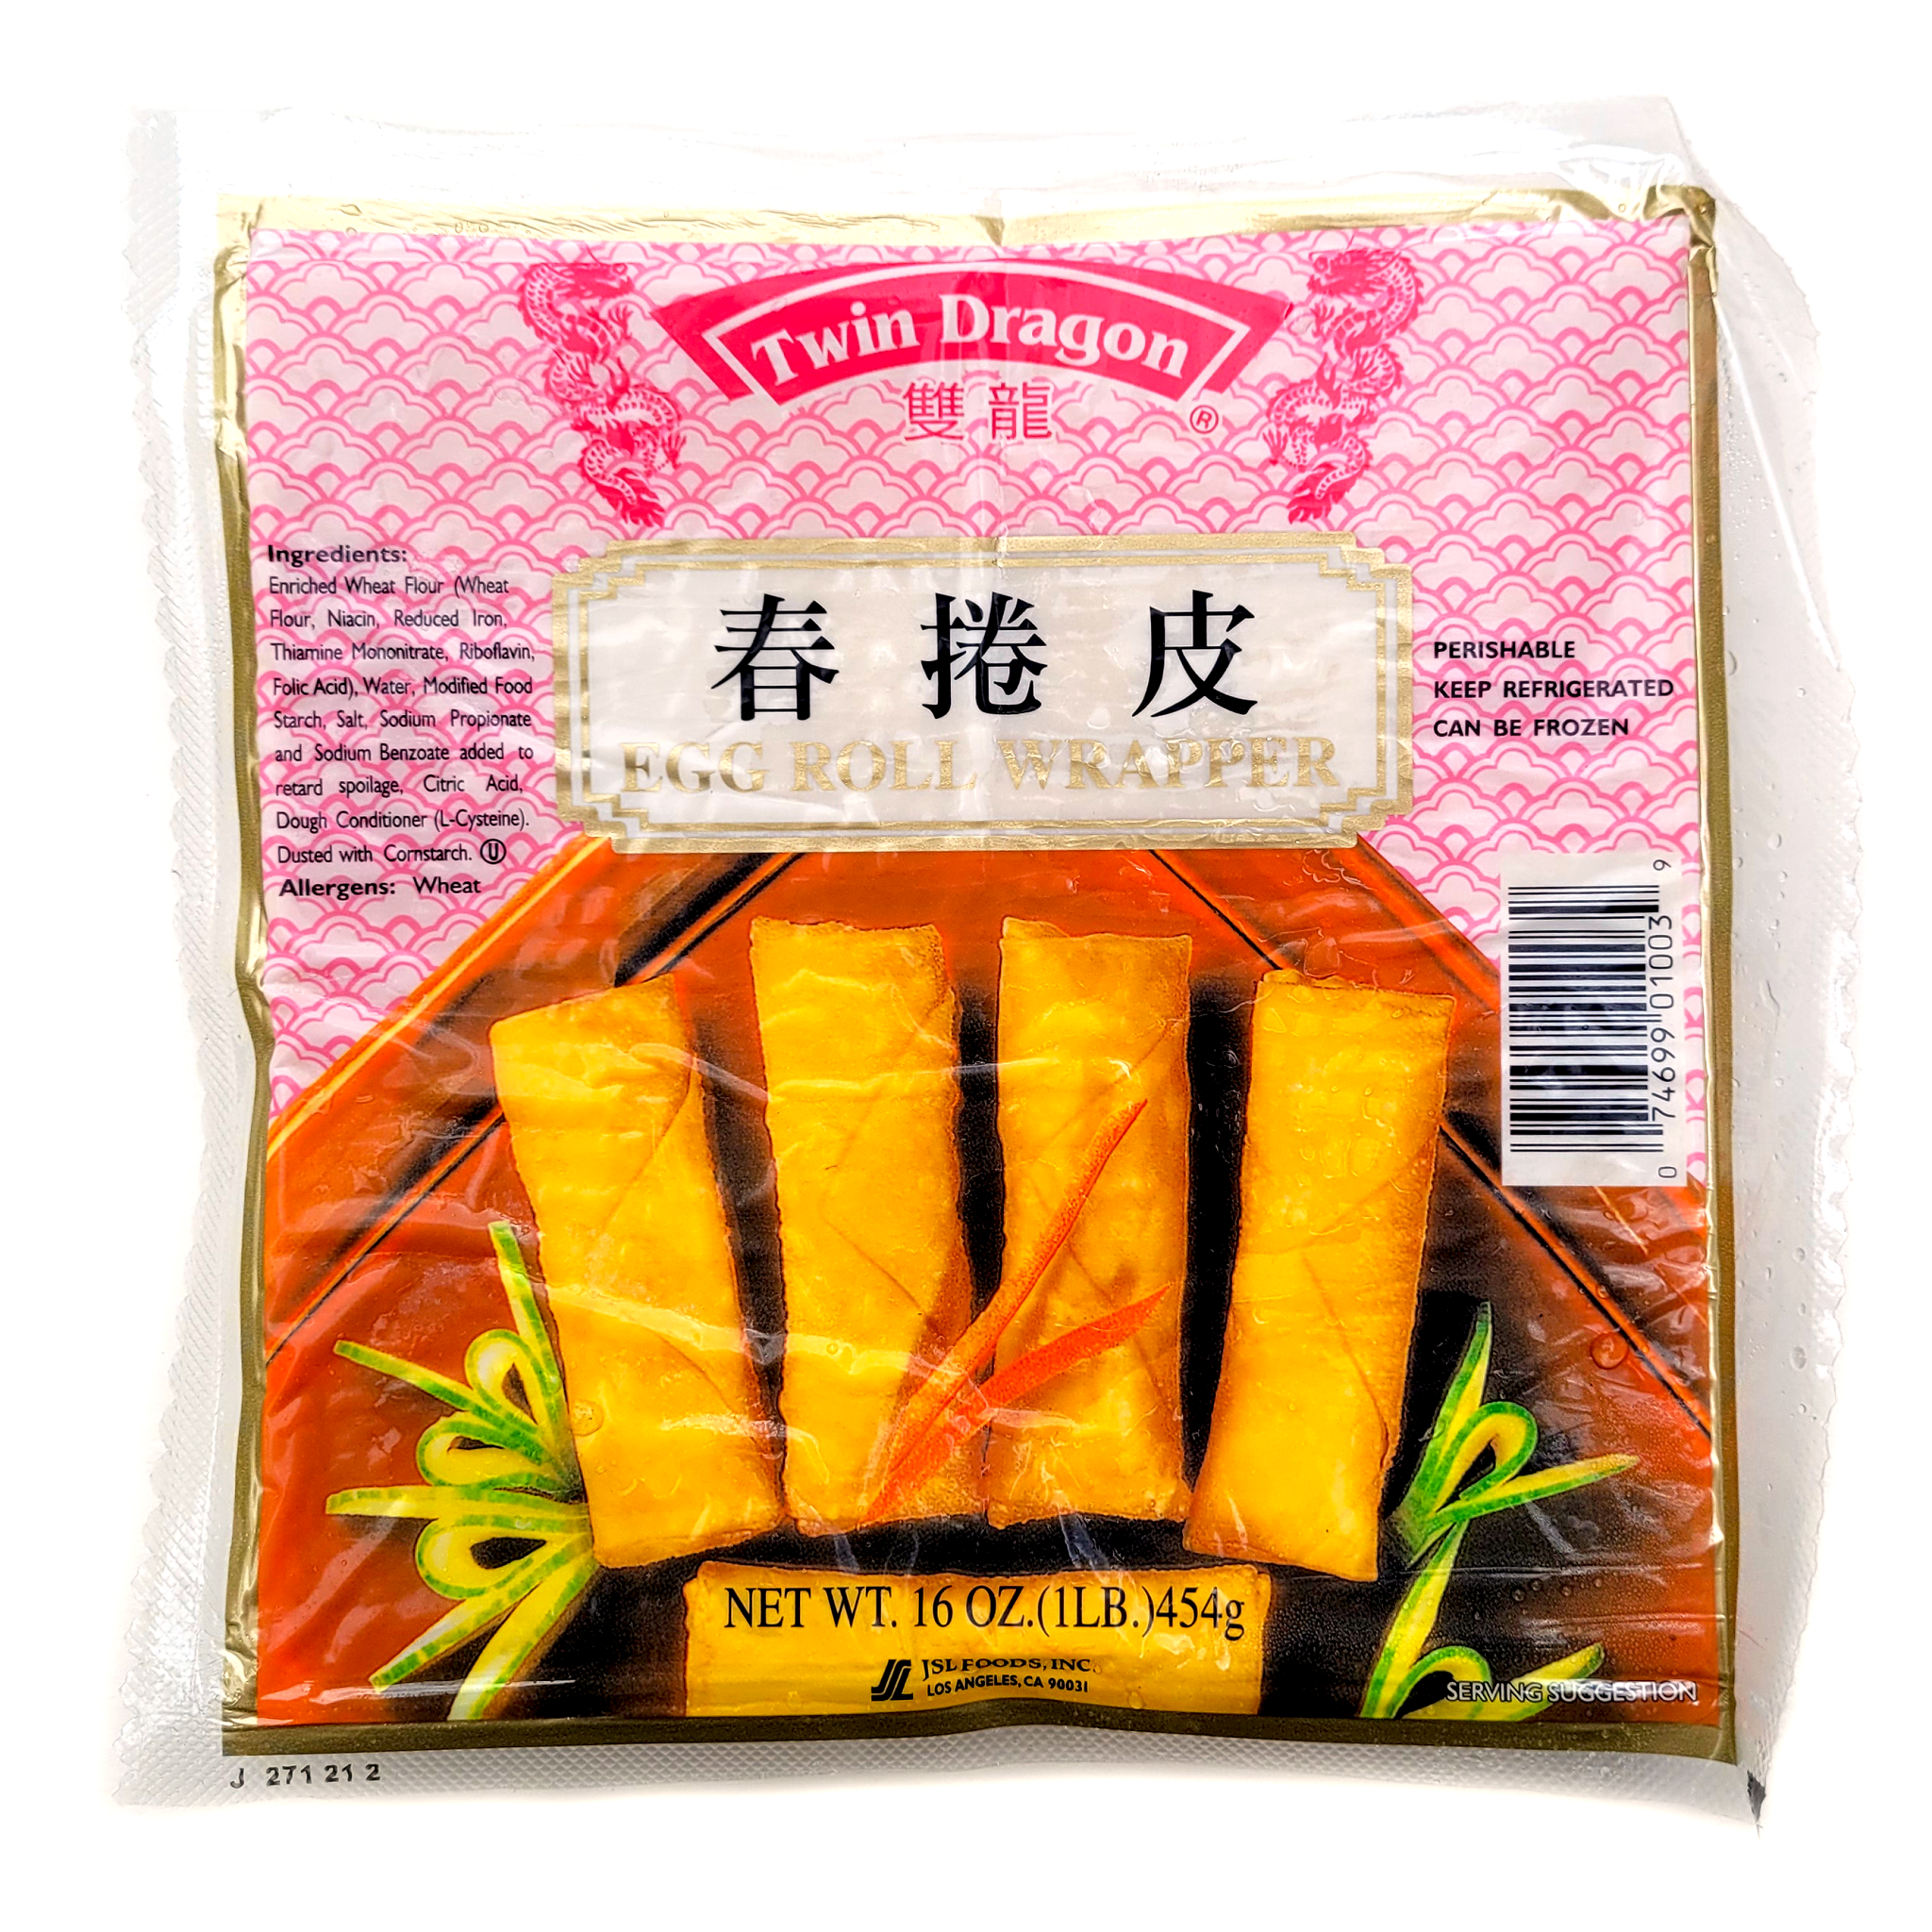 Twin Dragon Premium Egg Roll Wrappers, 18 oz